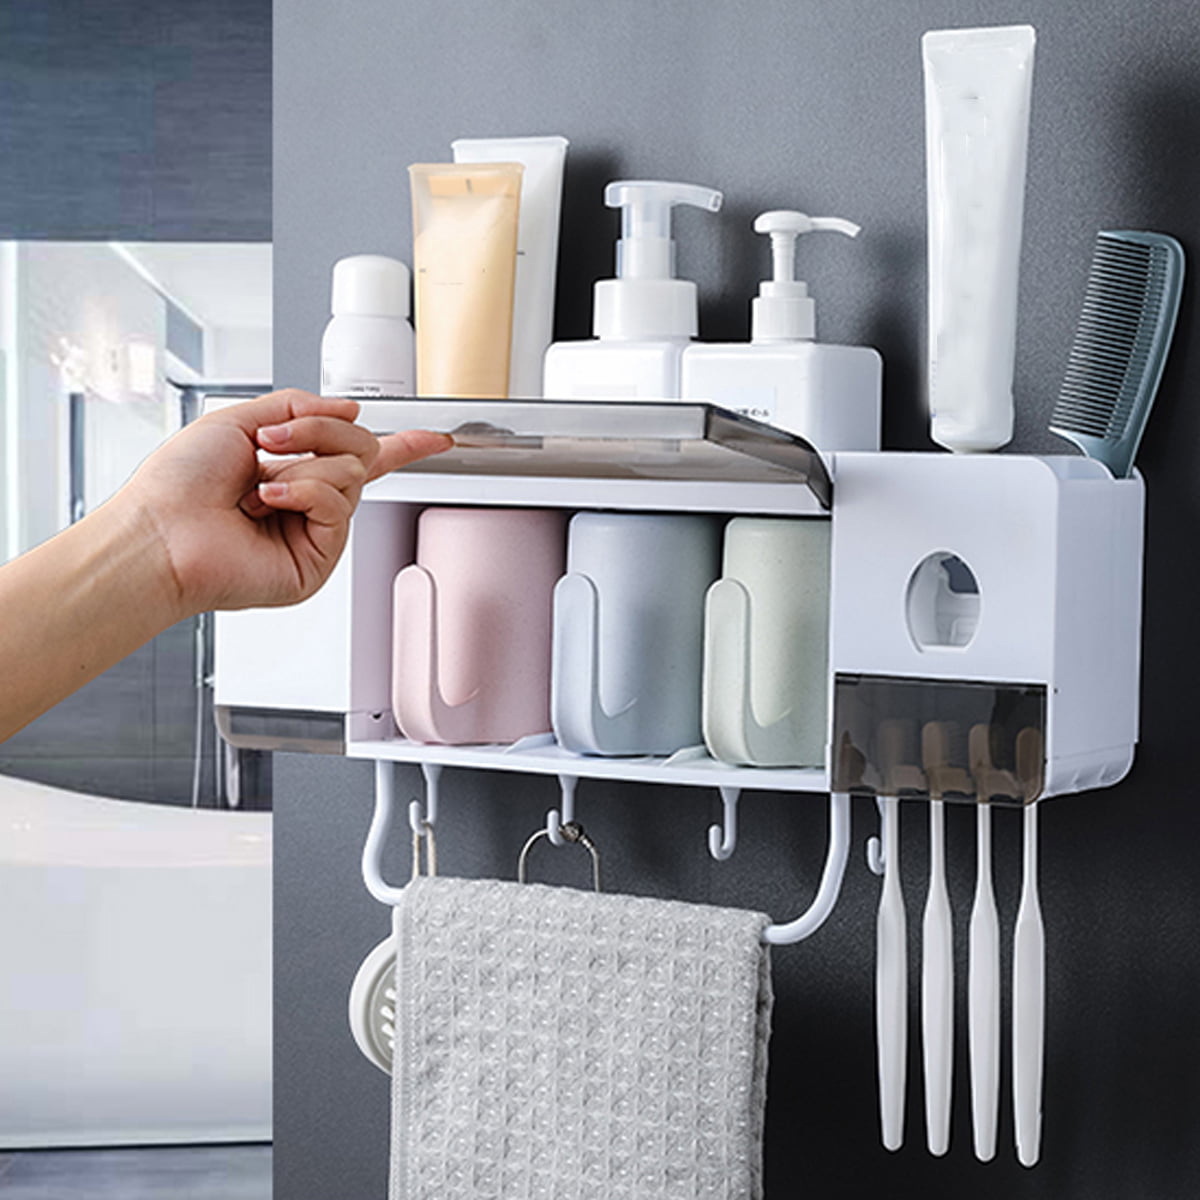 Wall Mounted Automatic Toothbrush Holder Toothpaste Dispenser Bathroom Organiser 